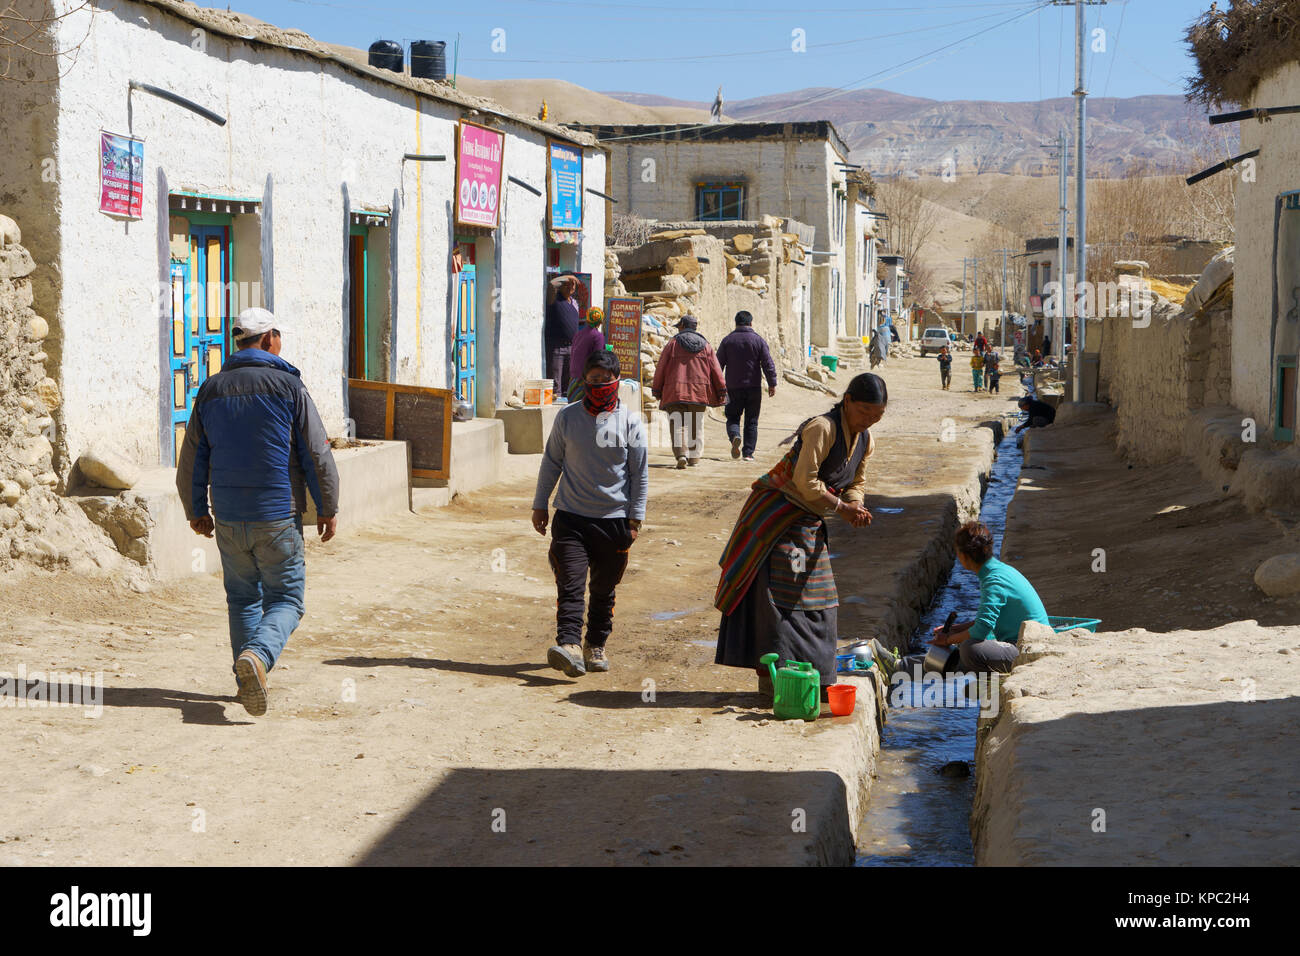 Picturesque street scene, Lo Manthang, Upper Mustang region, Nepal. Stock Photo